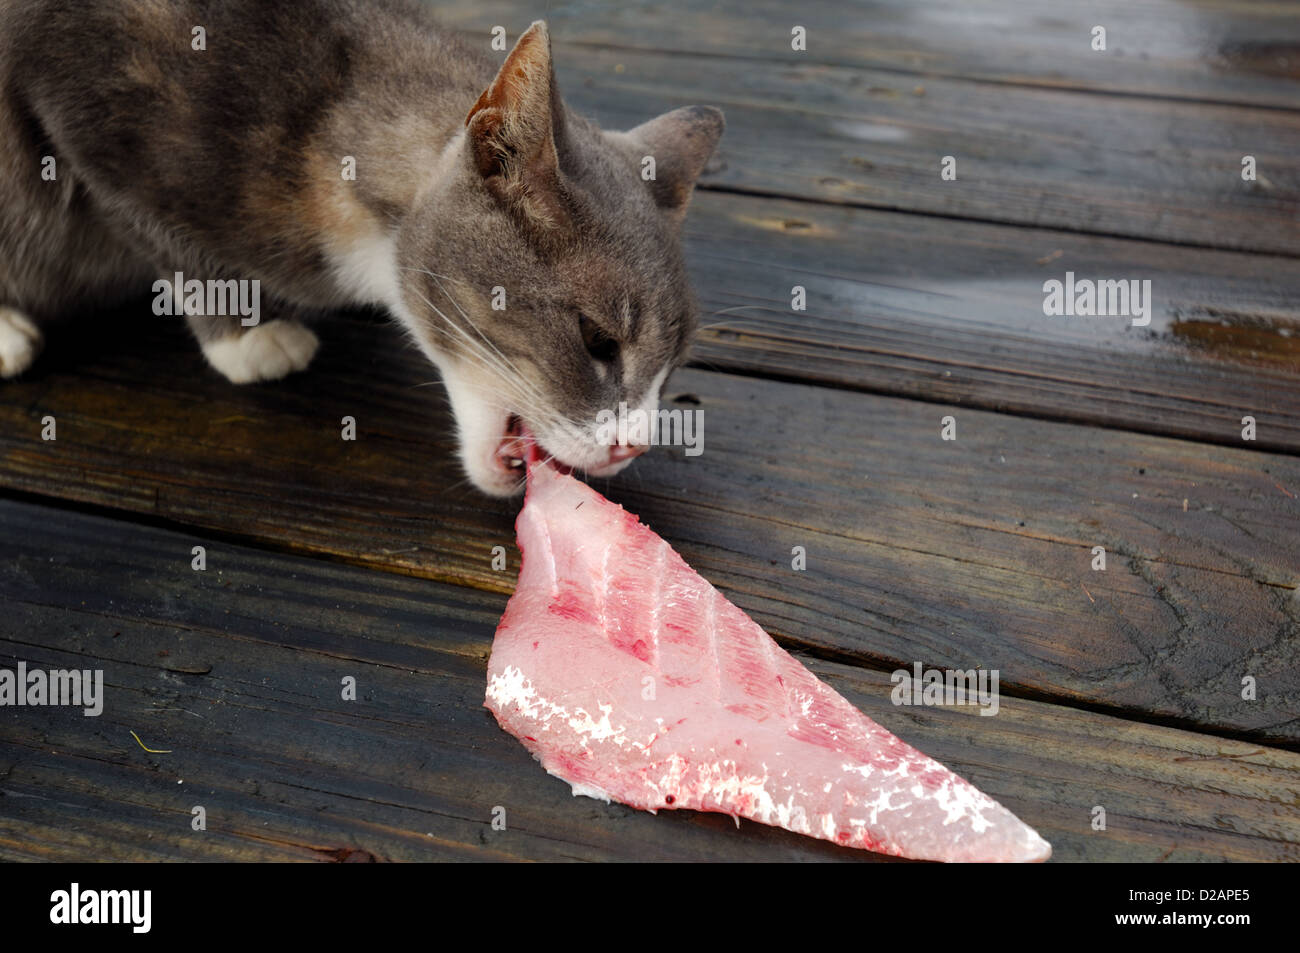 Feral house cat snatching fish fillet scraps Stock Photo